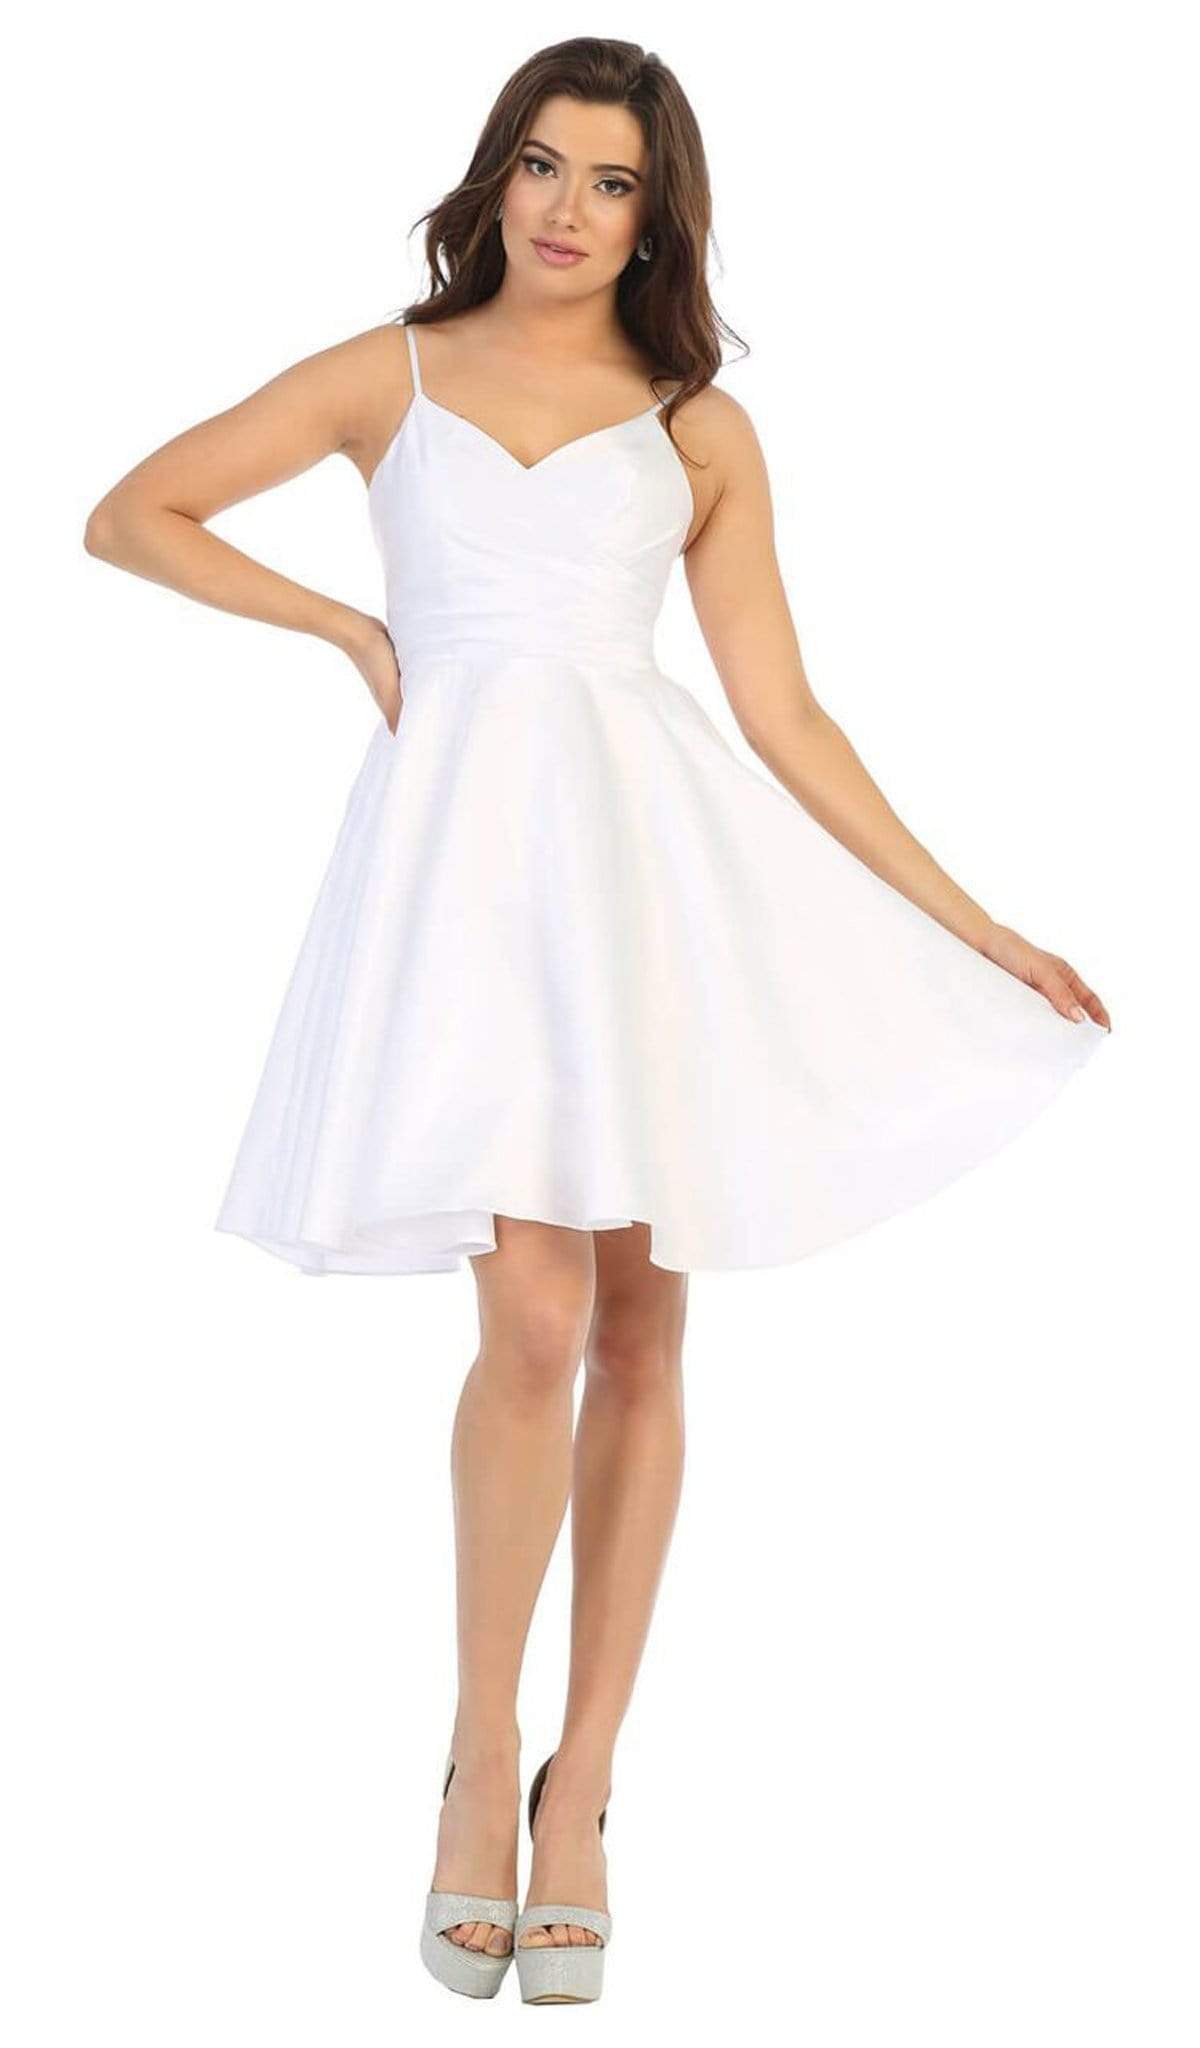 May Queen - MQ1654 V Neck Sleeveless Fit and Flare Short Dress Cocktail Dresses 2 / White